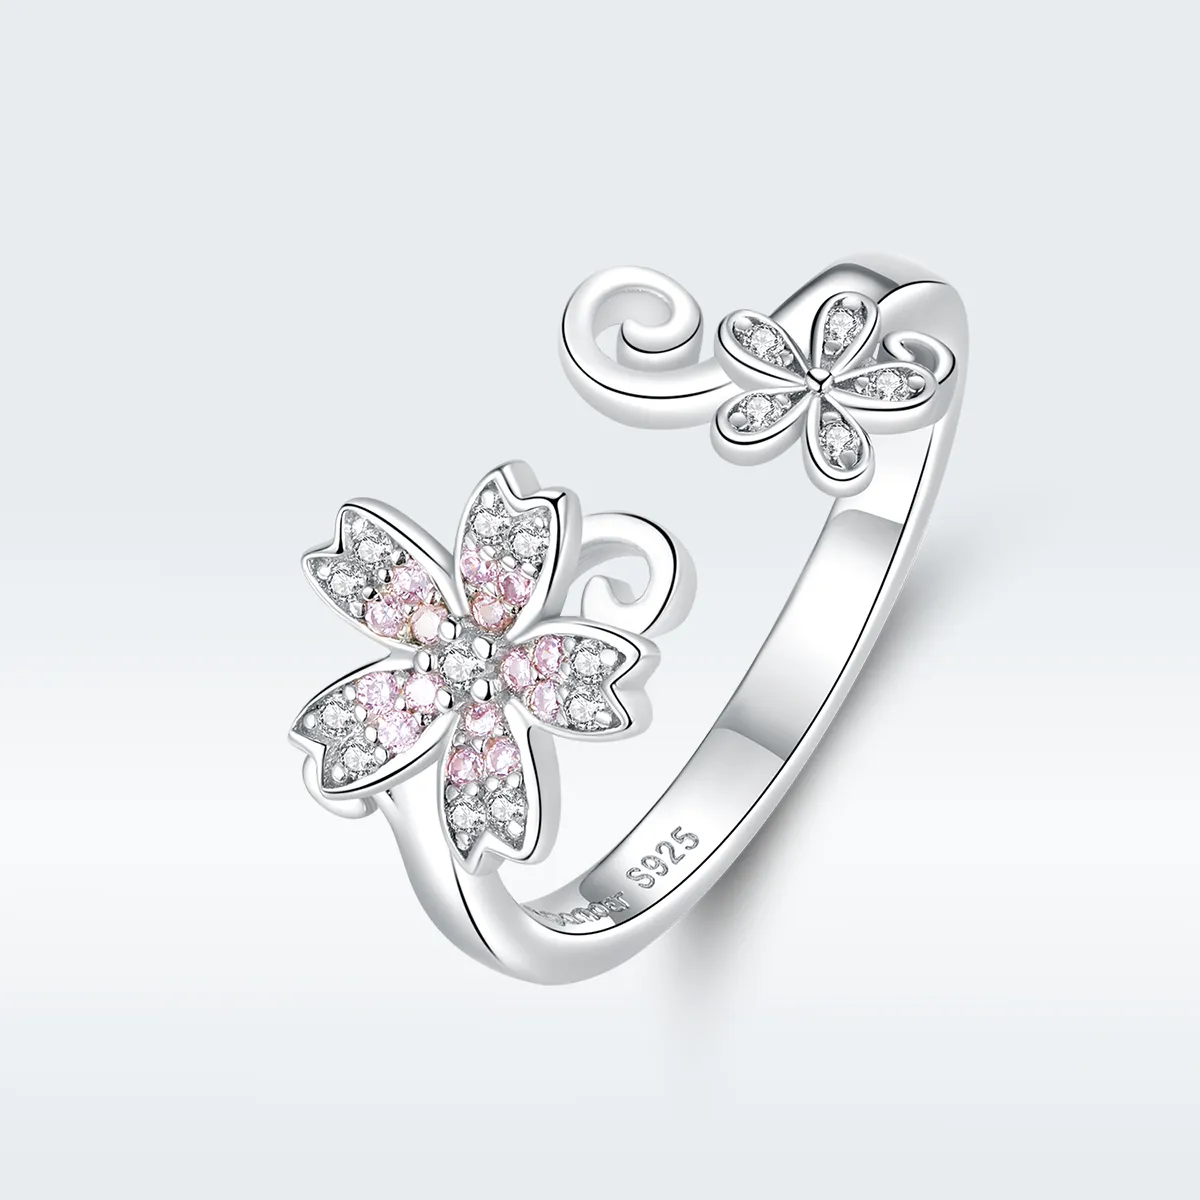 Pandora Style Silver Dazzling Daisy Open Ring - BSR086